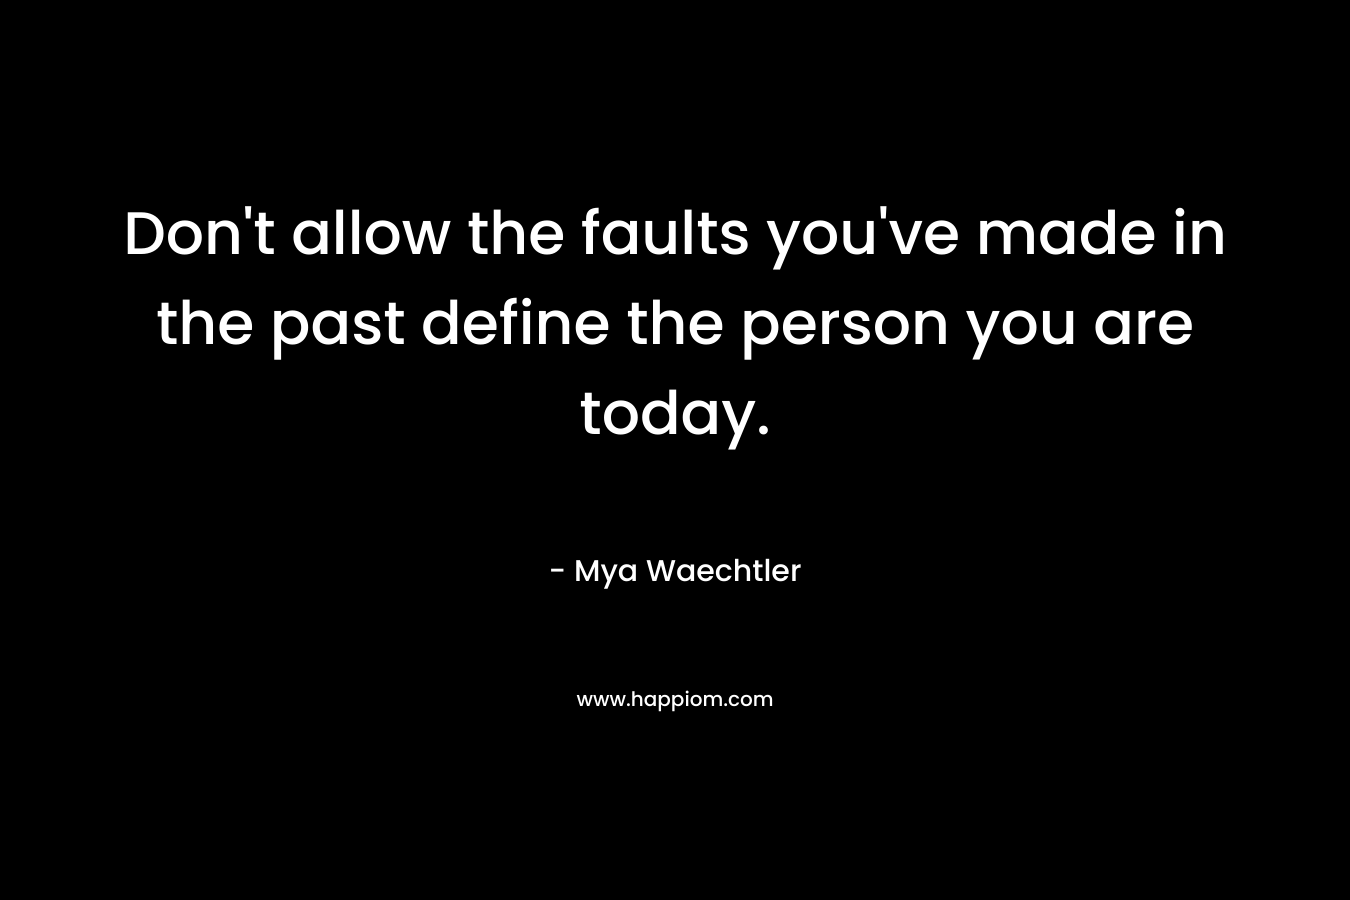 Don't allow the faults you've made in the past define the person you are today.